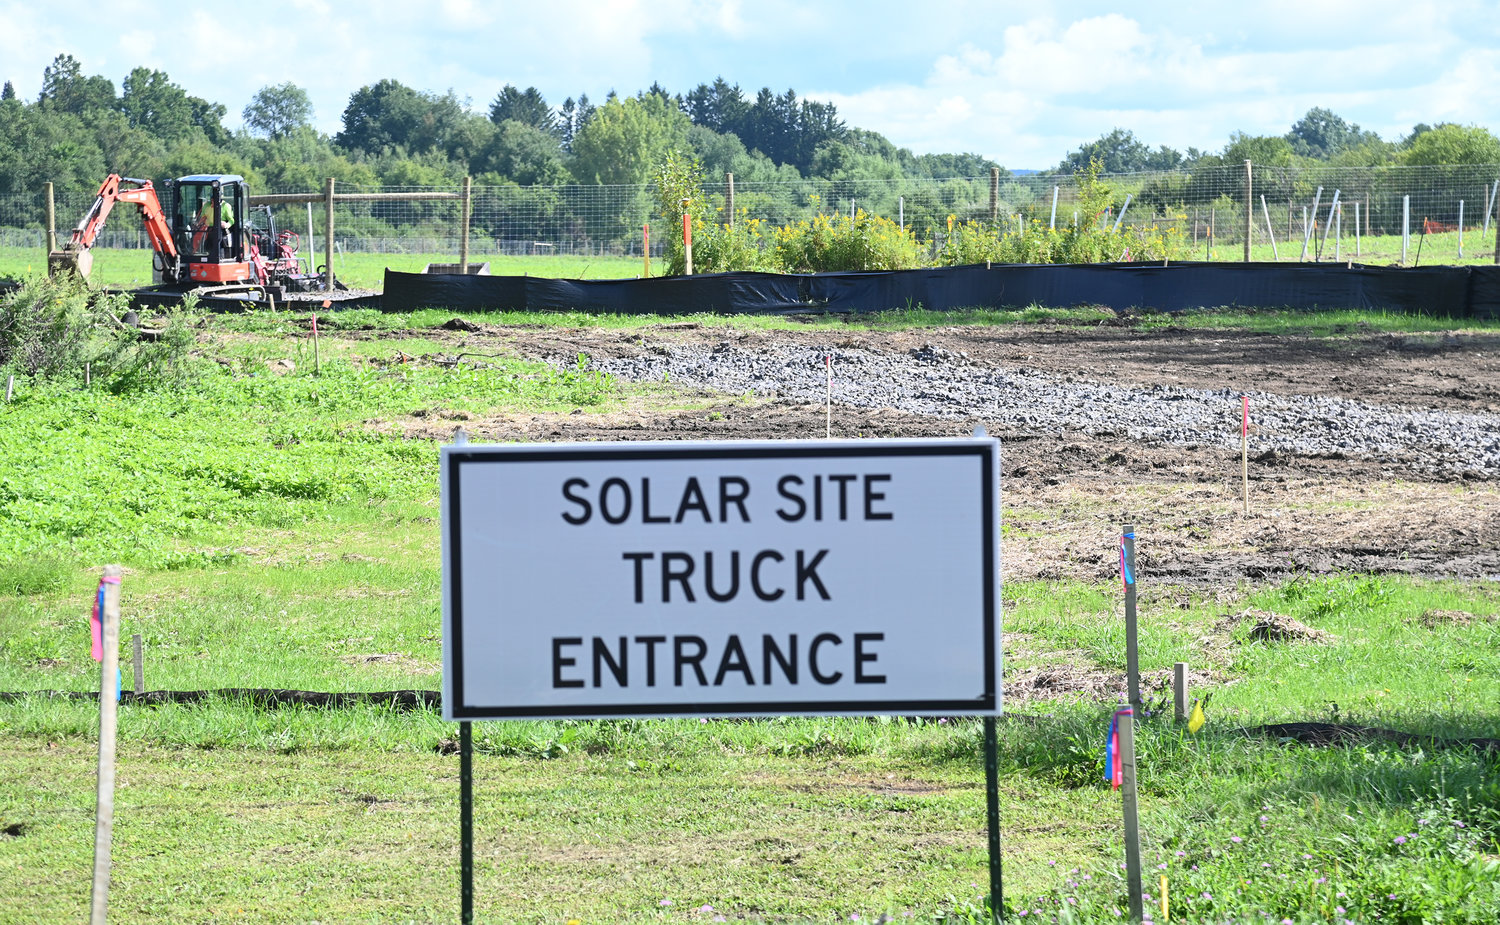 Site work, including clearing and leveling work, is performed at a solar panel field site off Route 233 in Stanwix Heights across from 6735 Route 233 earlier this month. The project had been approved before the city’s Common Council enacted a moratorium on solar array projects. Legislation to amend the city’s Code of Ordinances regarding solar arrays has been sent from the council to the city Planning Board for review.